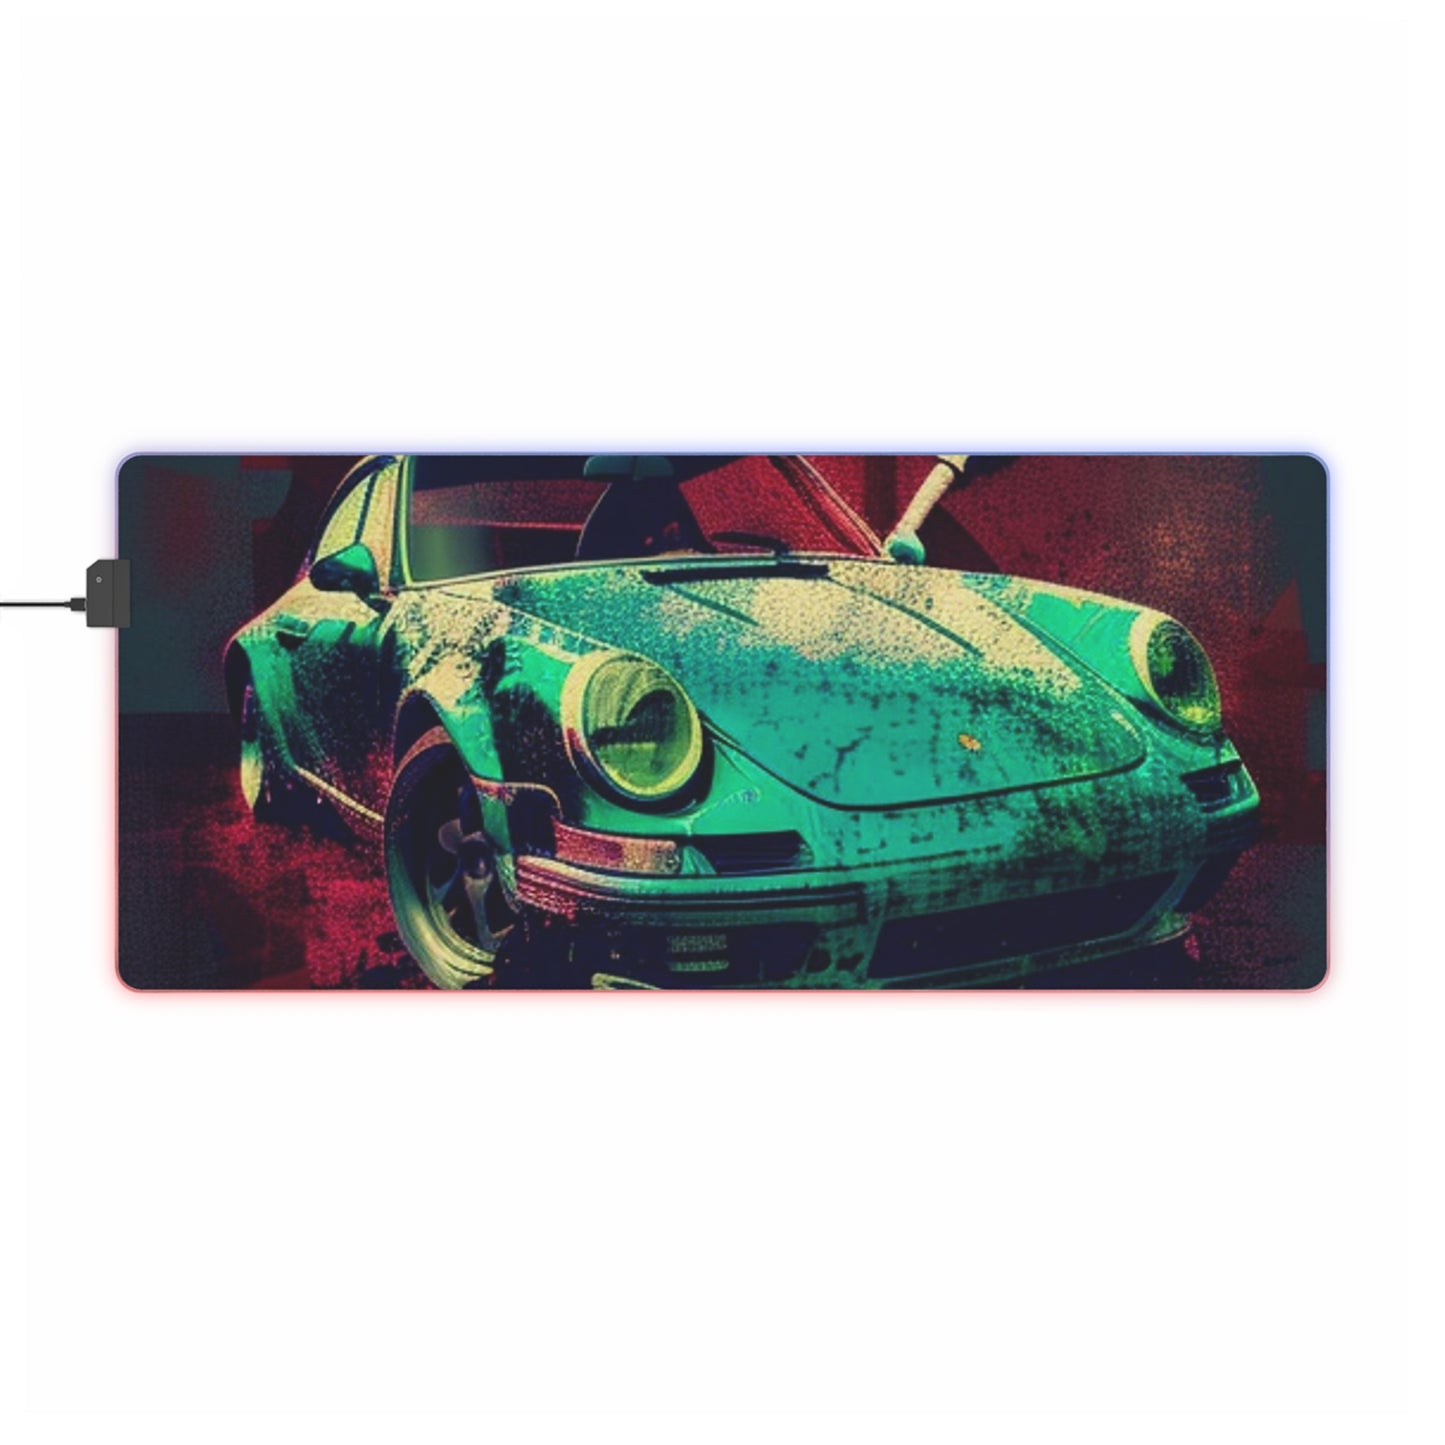 LED Gaming Mouse Pad Porsche Abstract 4